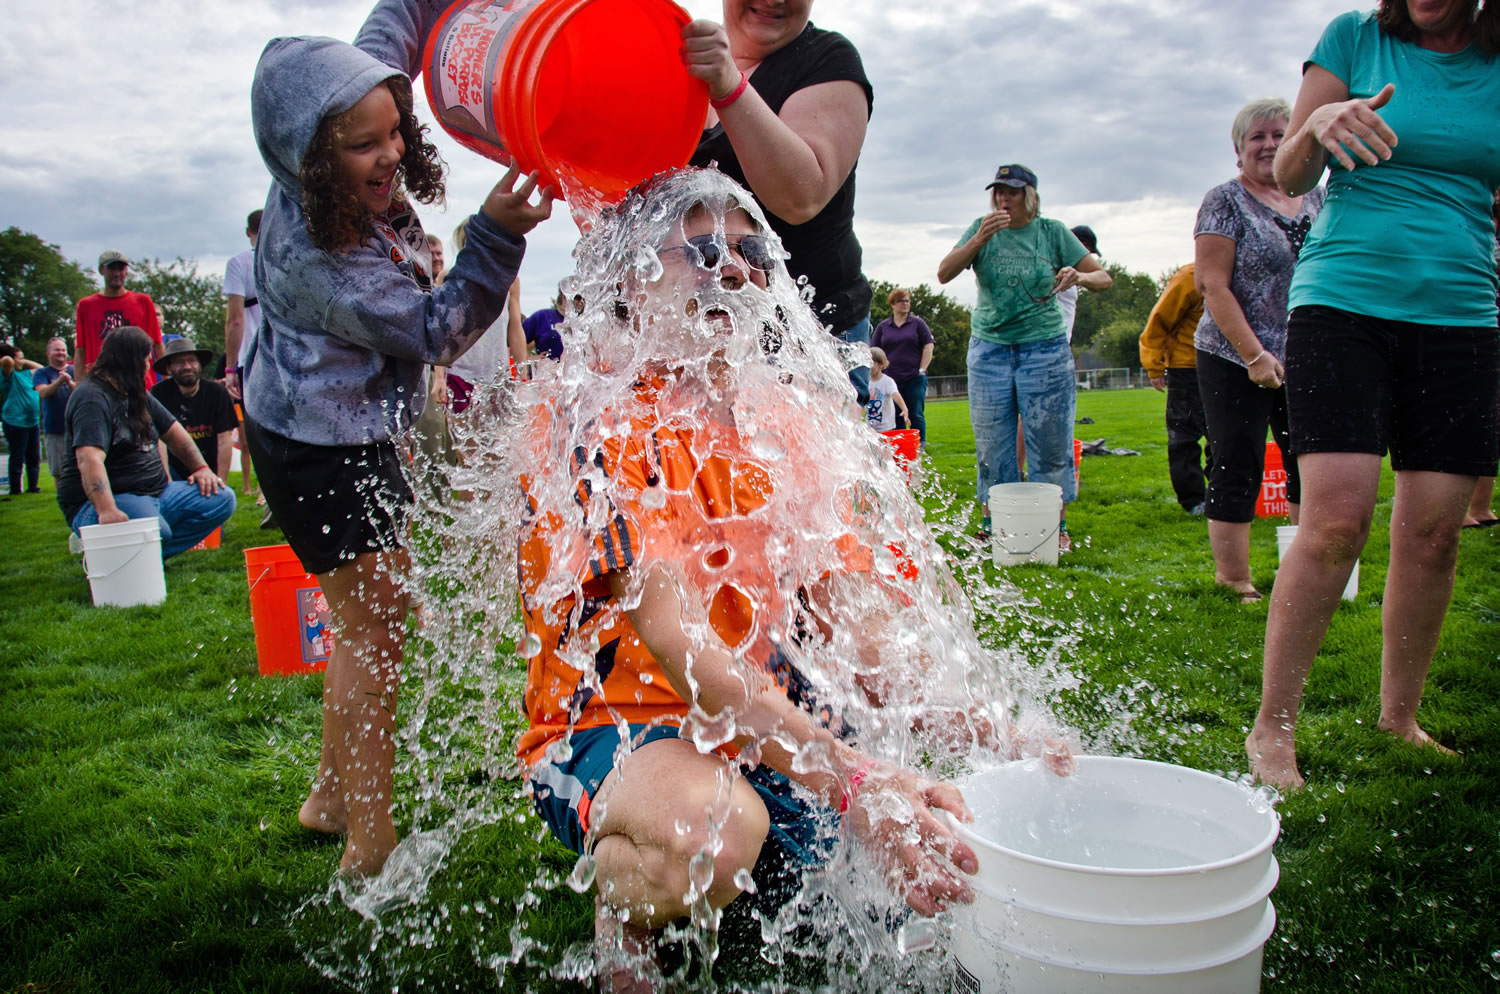 Walla Walla Union-Bulletin files
Chas McKhann has ice water poured on himself in September for the Walla Walla Grand Ice Bucket Challenge in Walla Walla. From June 1 to Sept. 1, Facebook users shared more than 17 million videos related to the Ice Bucket Challenge.